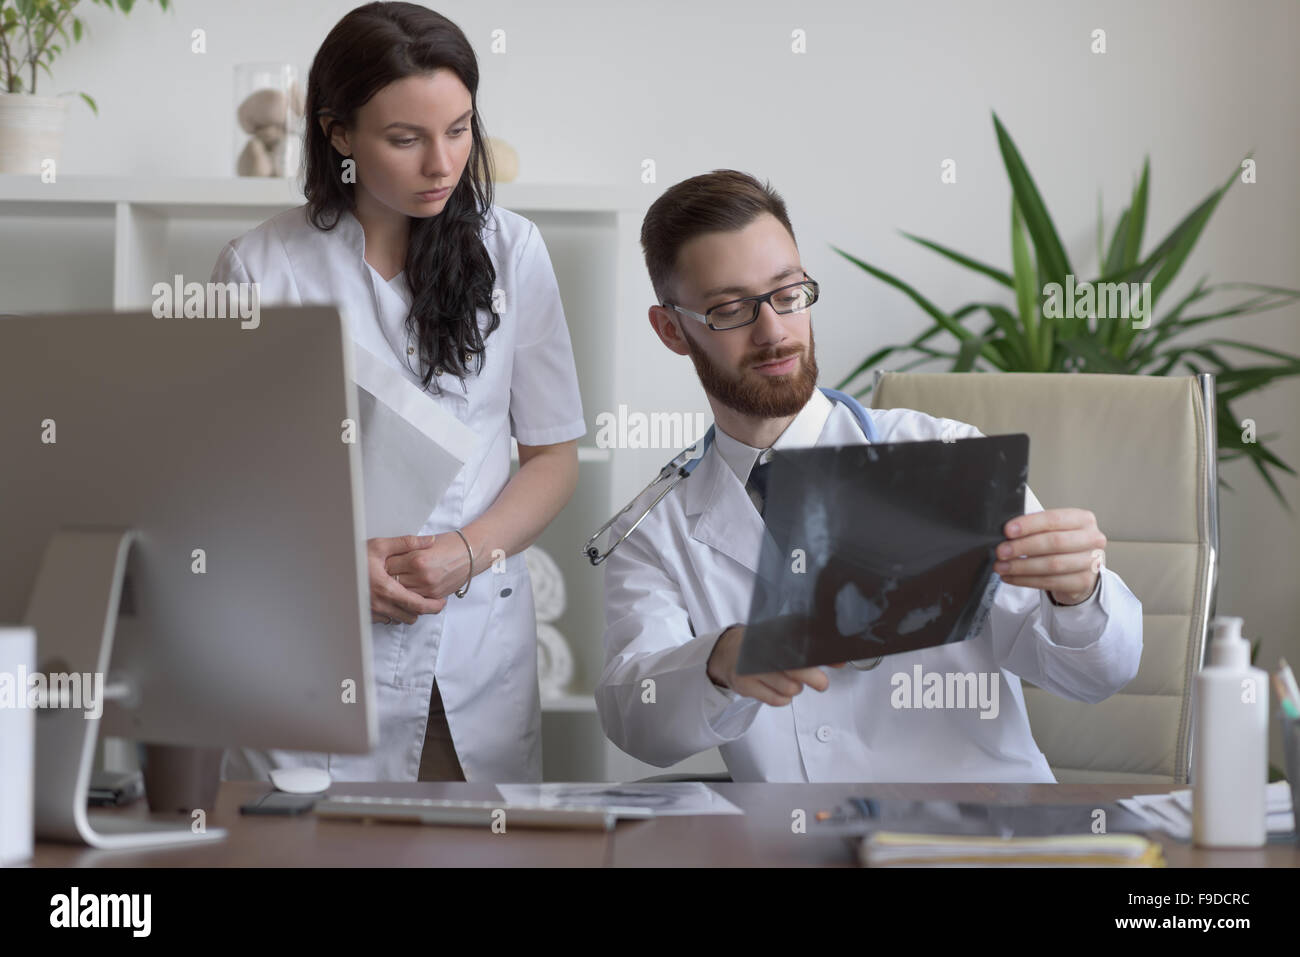 Doctors discussing intestines xray at medical office Stock Photo